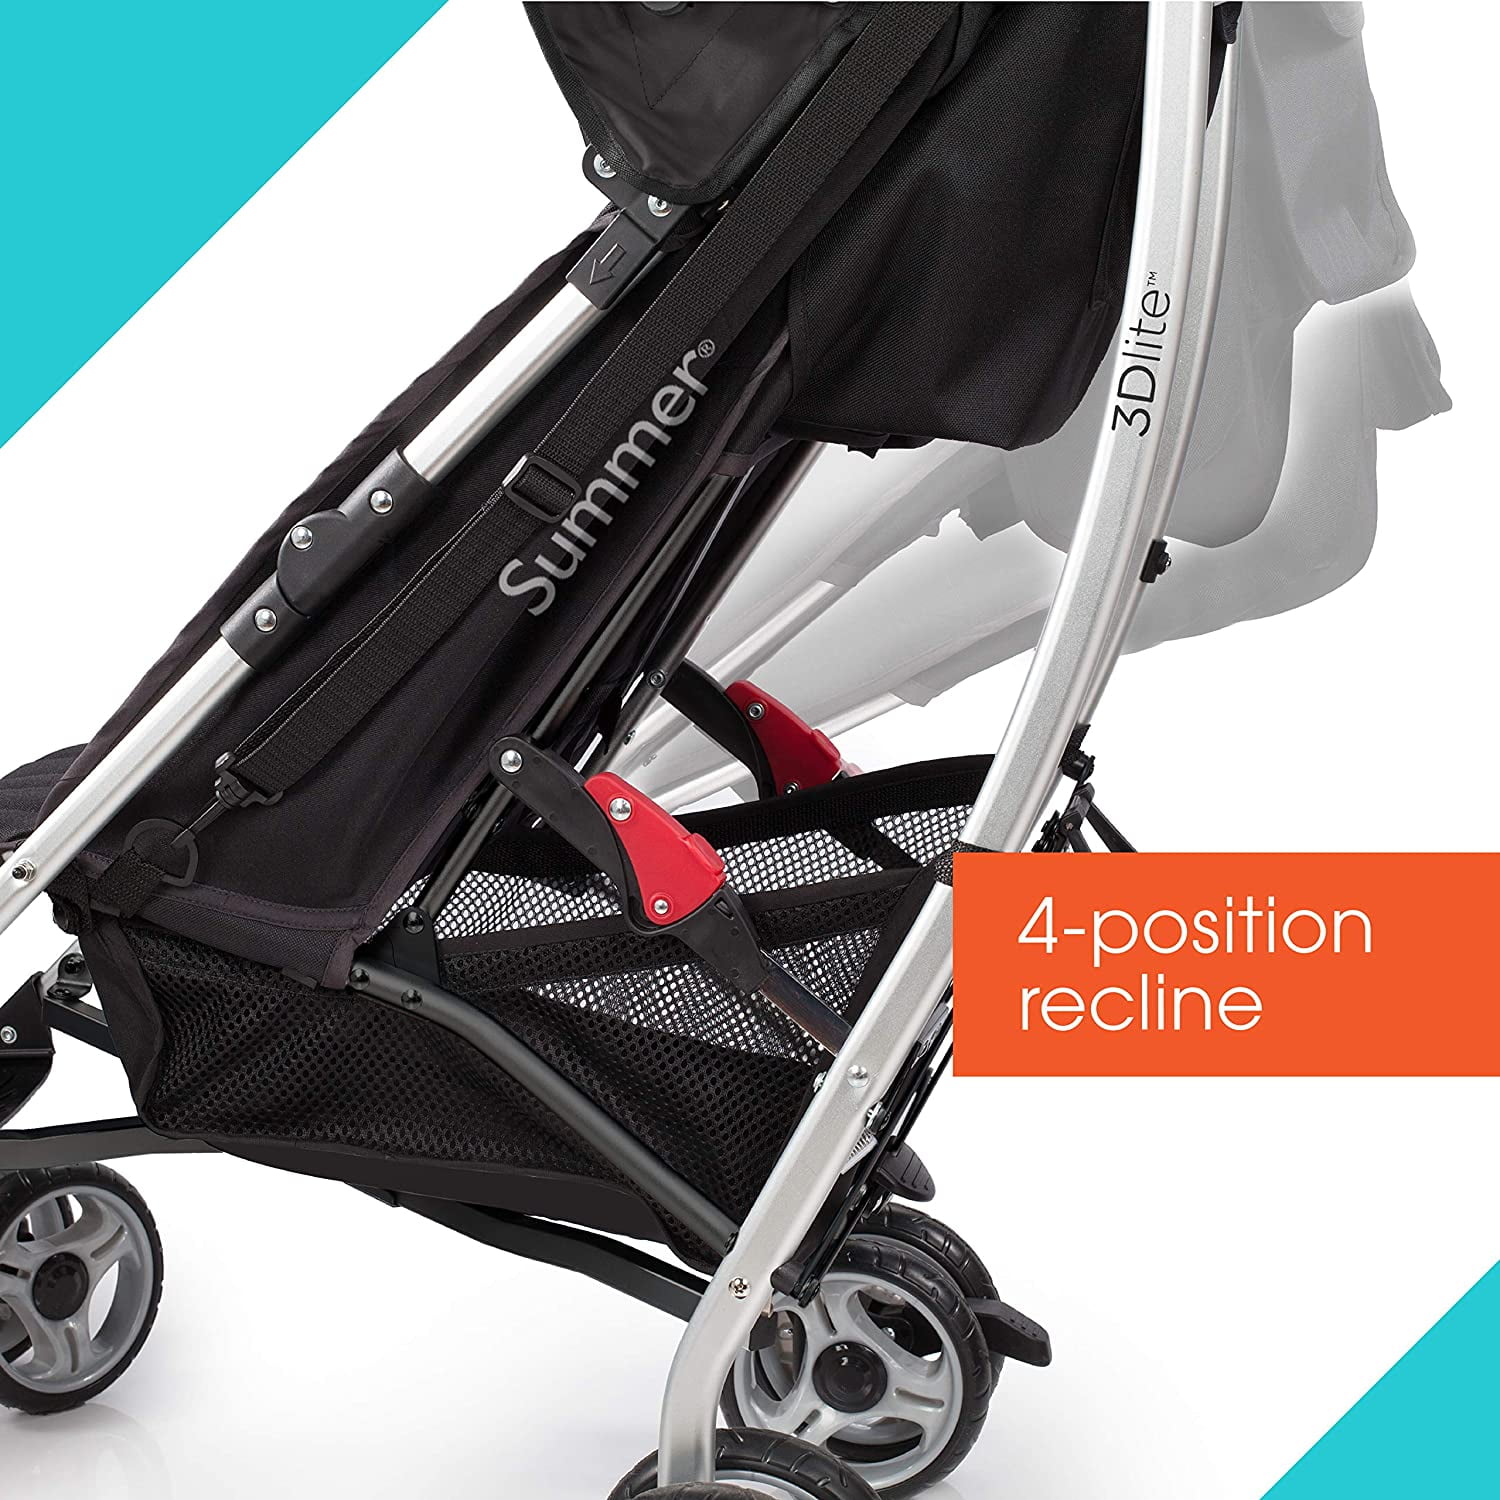 Baby Products Online - Summer Baby Stroller Breathable Mesh Air